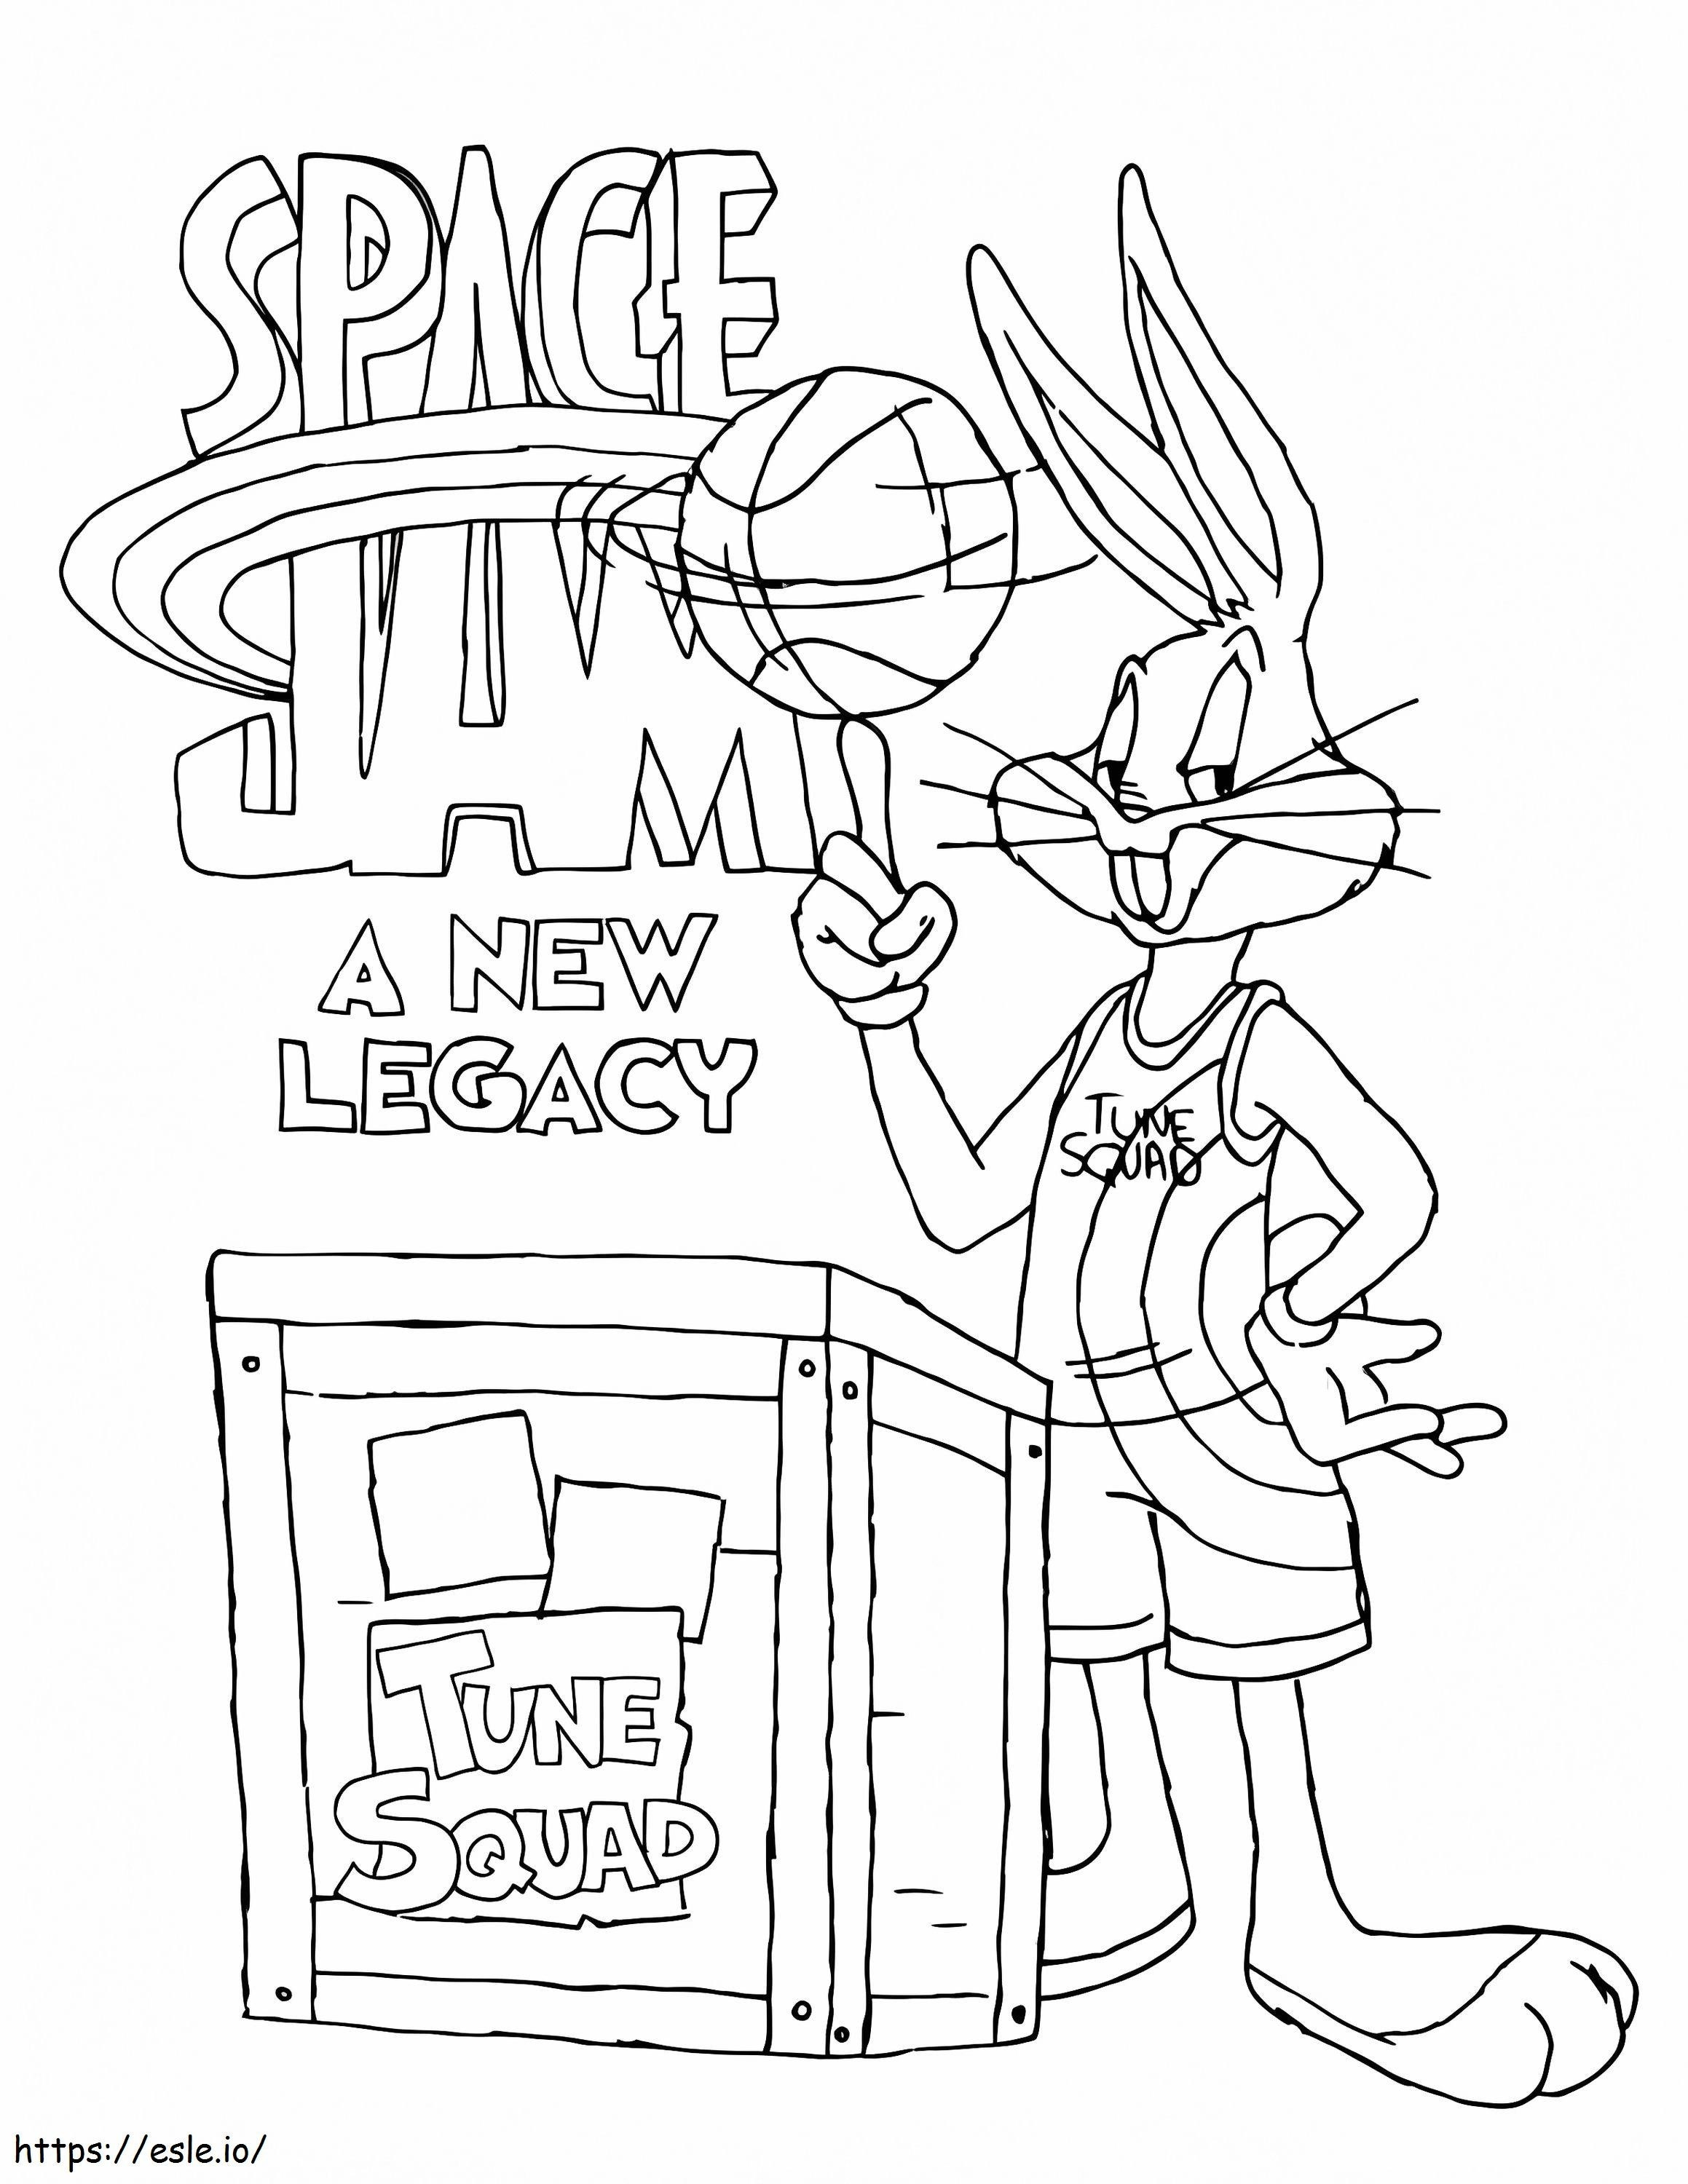 Tune squad bugs bunny coloring page